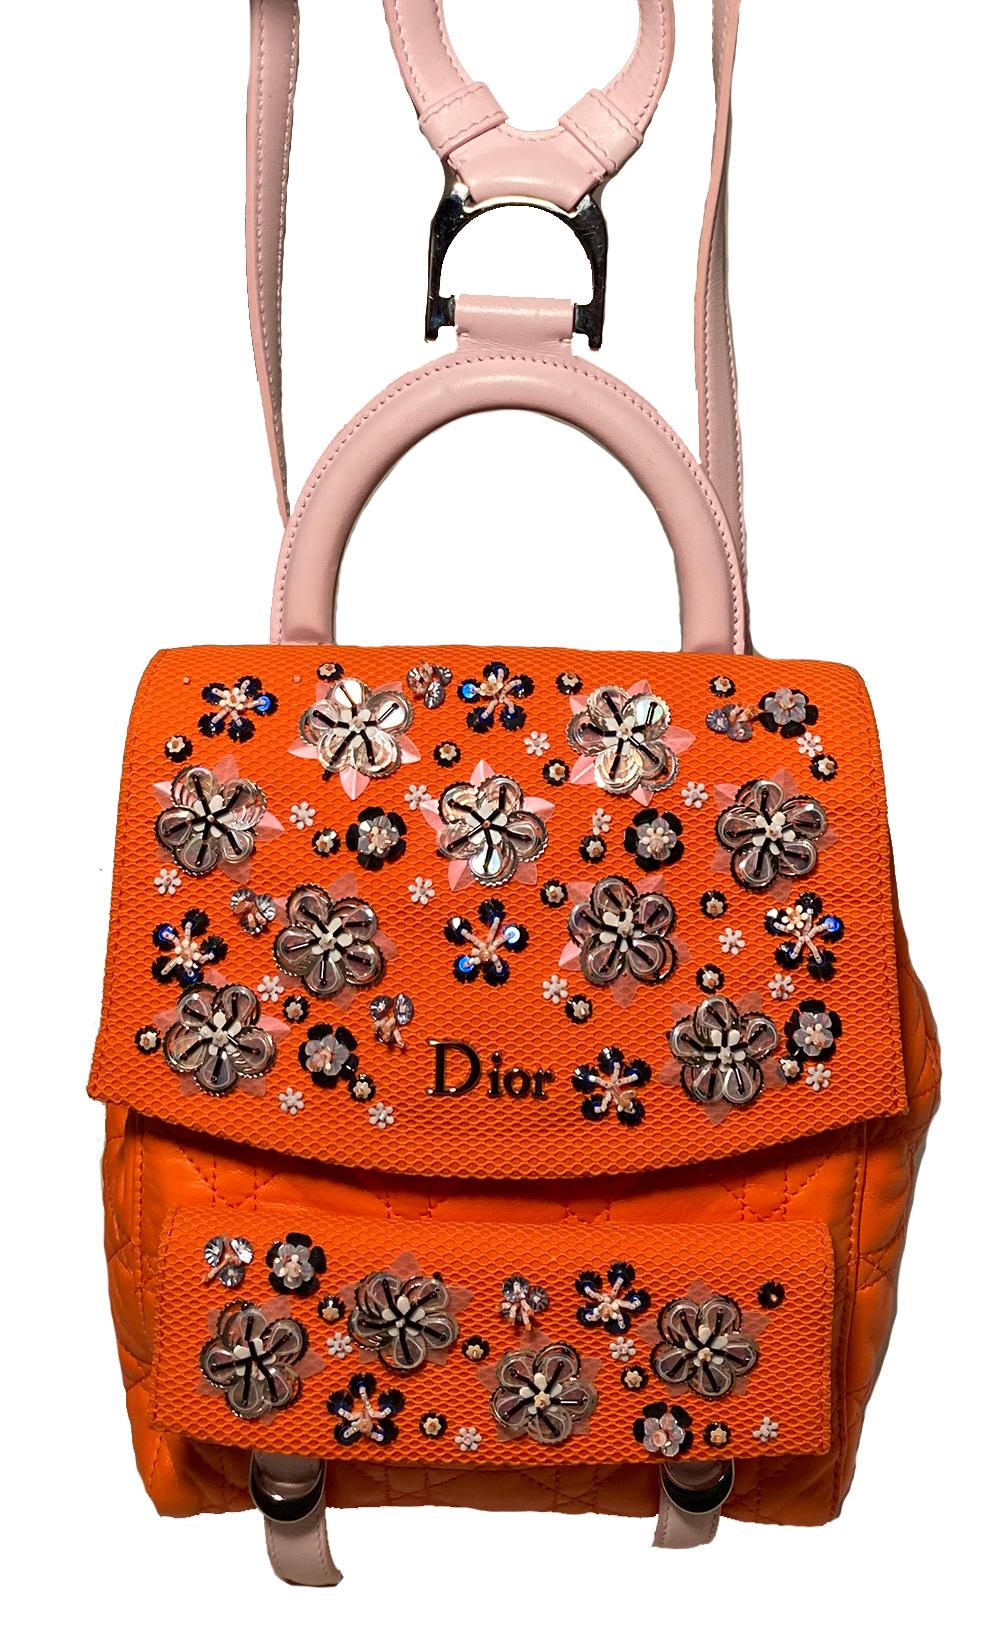 Christian Dior Orange Stardust Backpack in NWOT condition. Orange cannage quilted leather exterior trimmed with pale pink leather shoulder straps, silver hardware and delicate floral beaded embroidery throughout the front side. Front double buckle